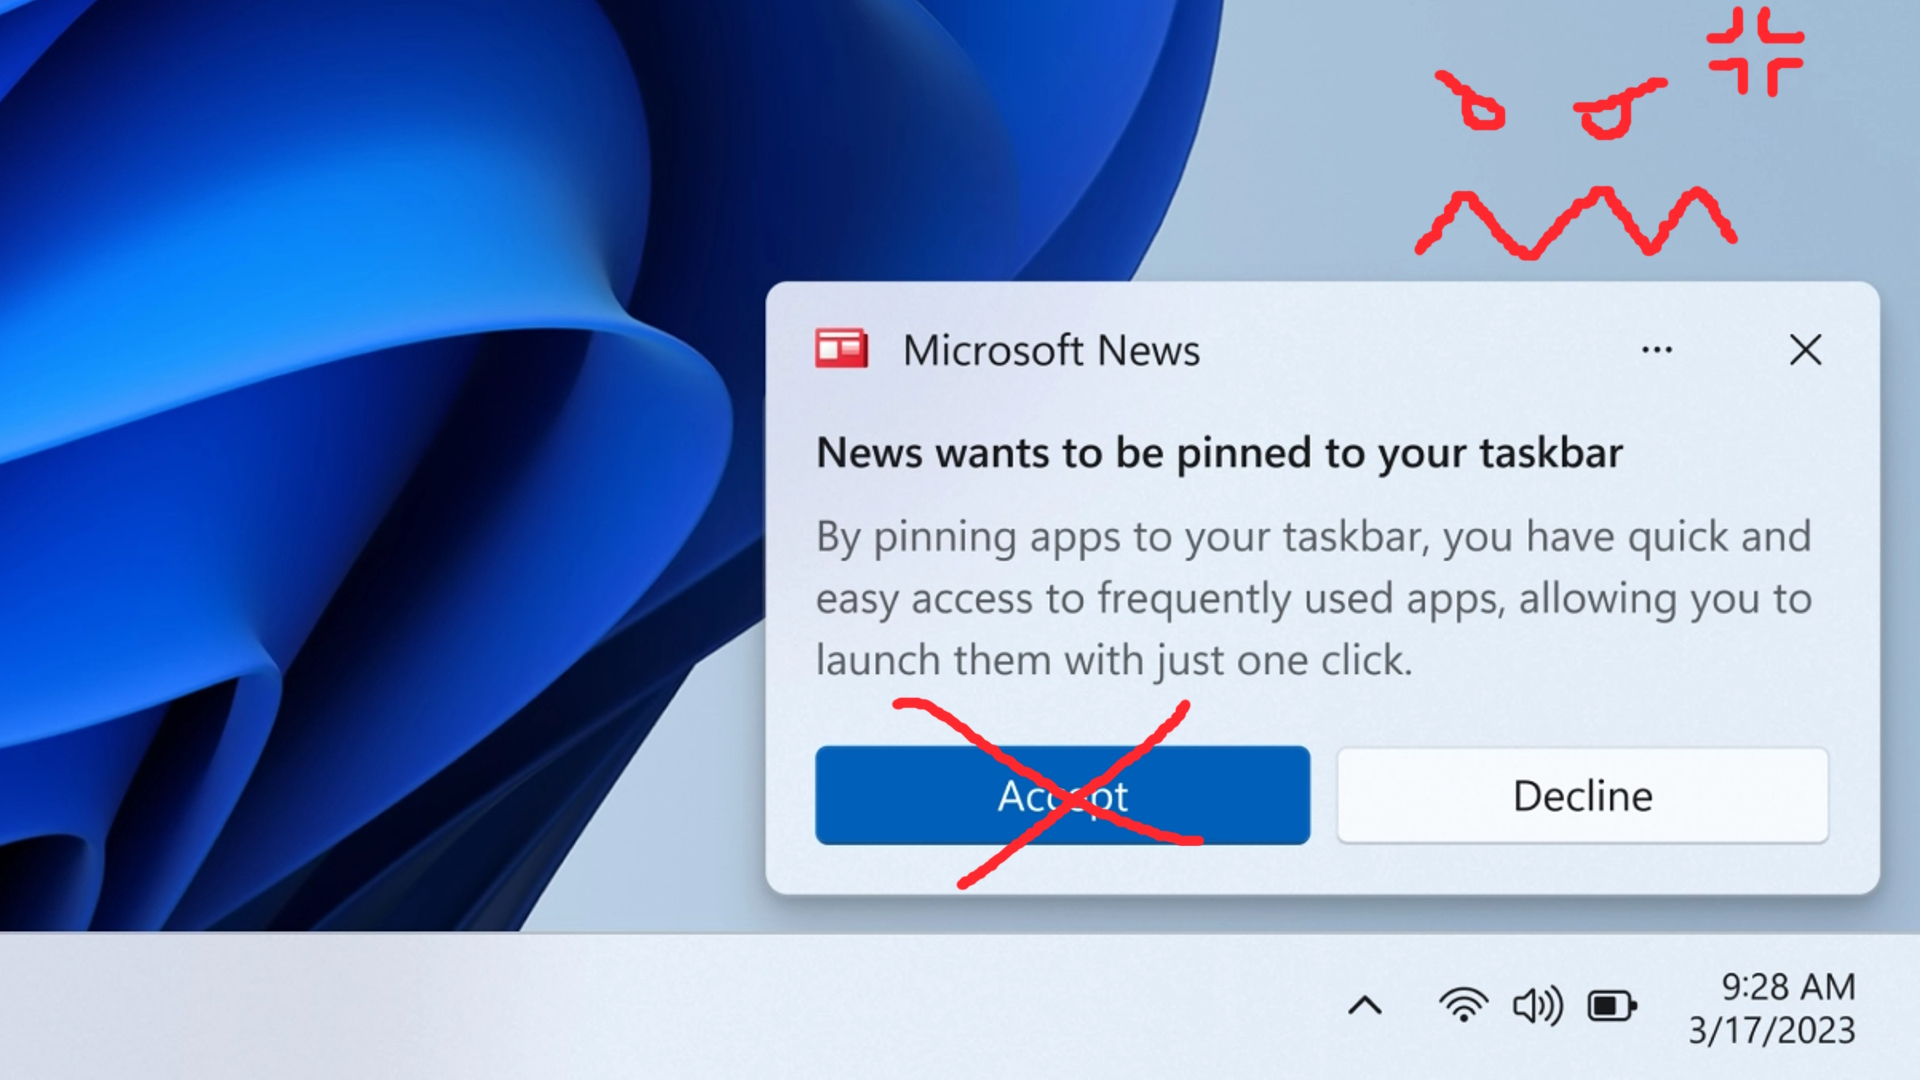  Windows 11 apps may soon annoy us with more notifications 